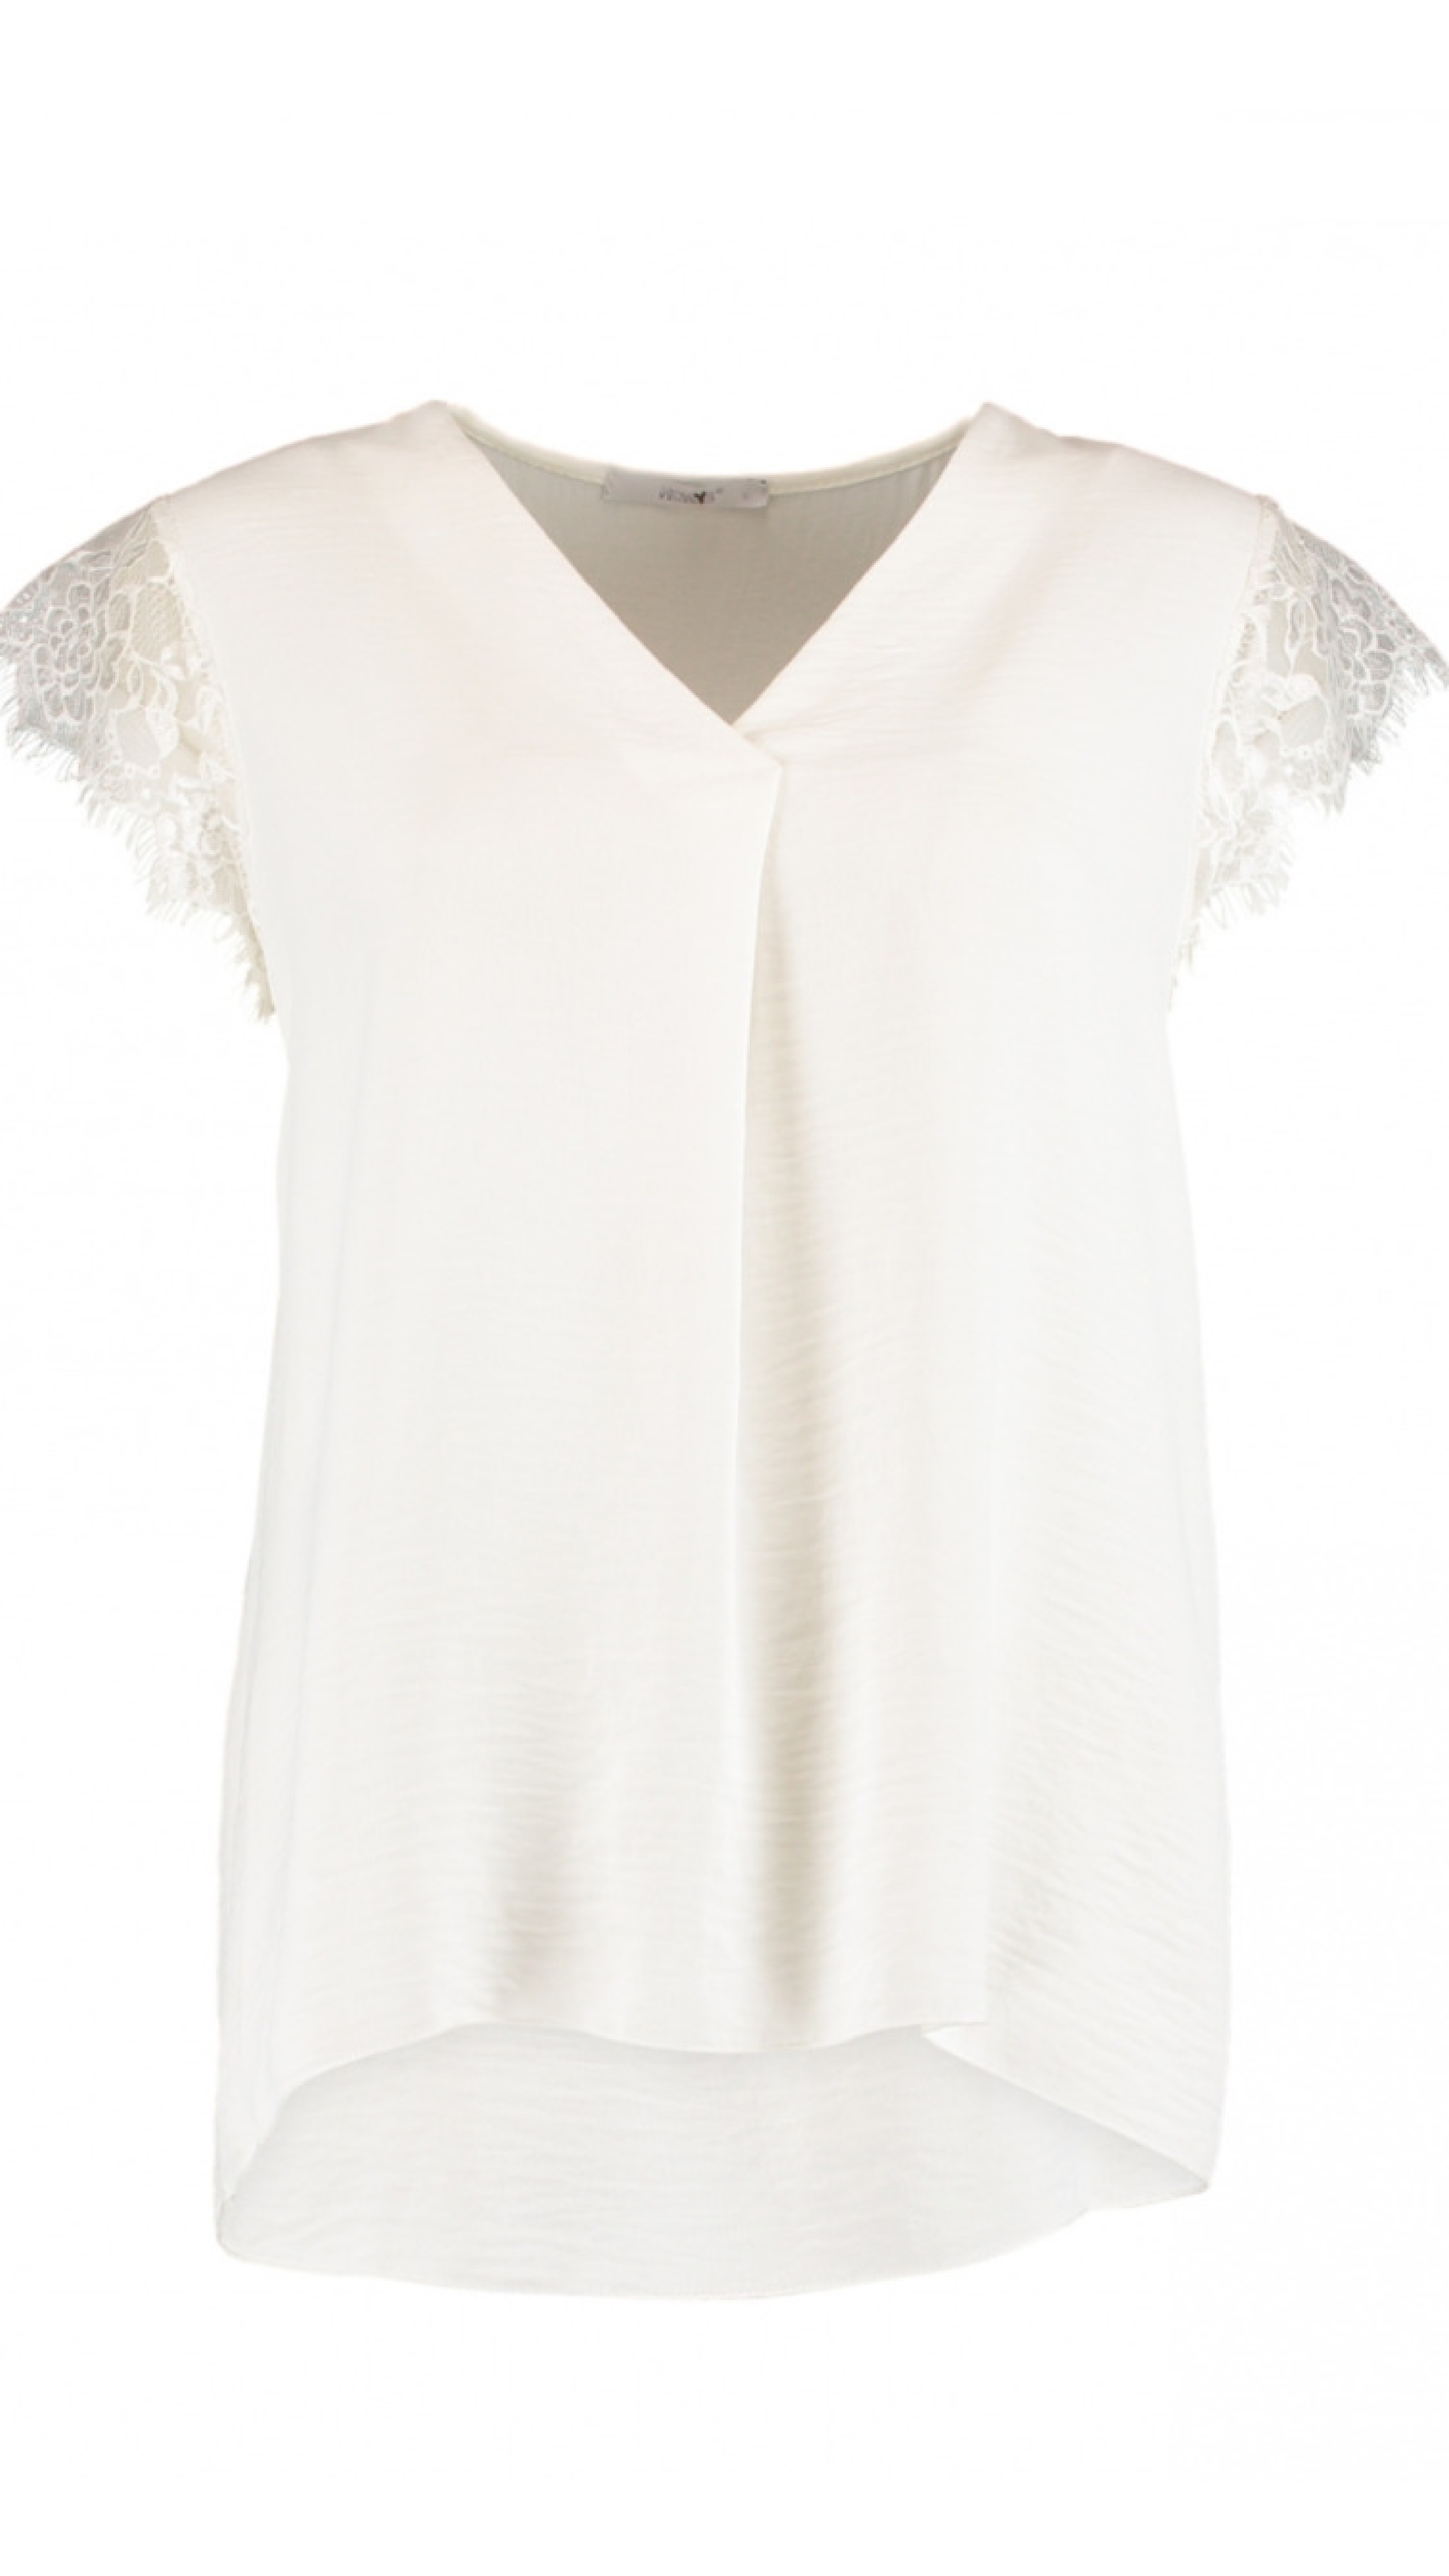 Marie White Lace Sleeve Top